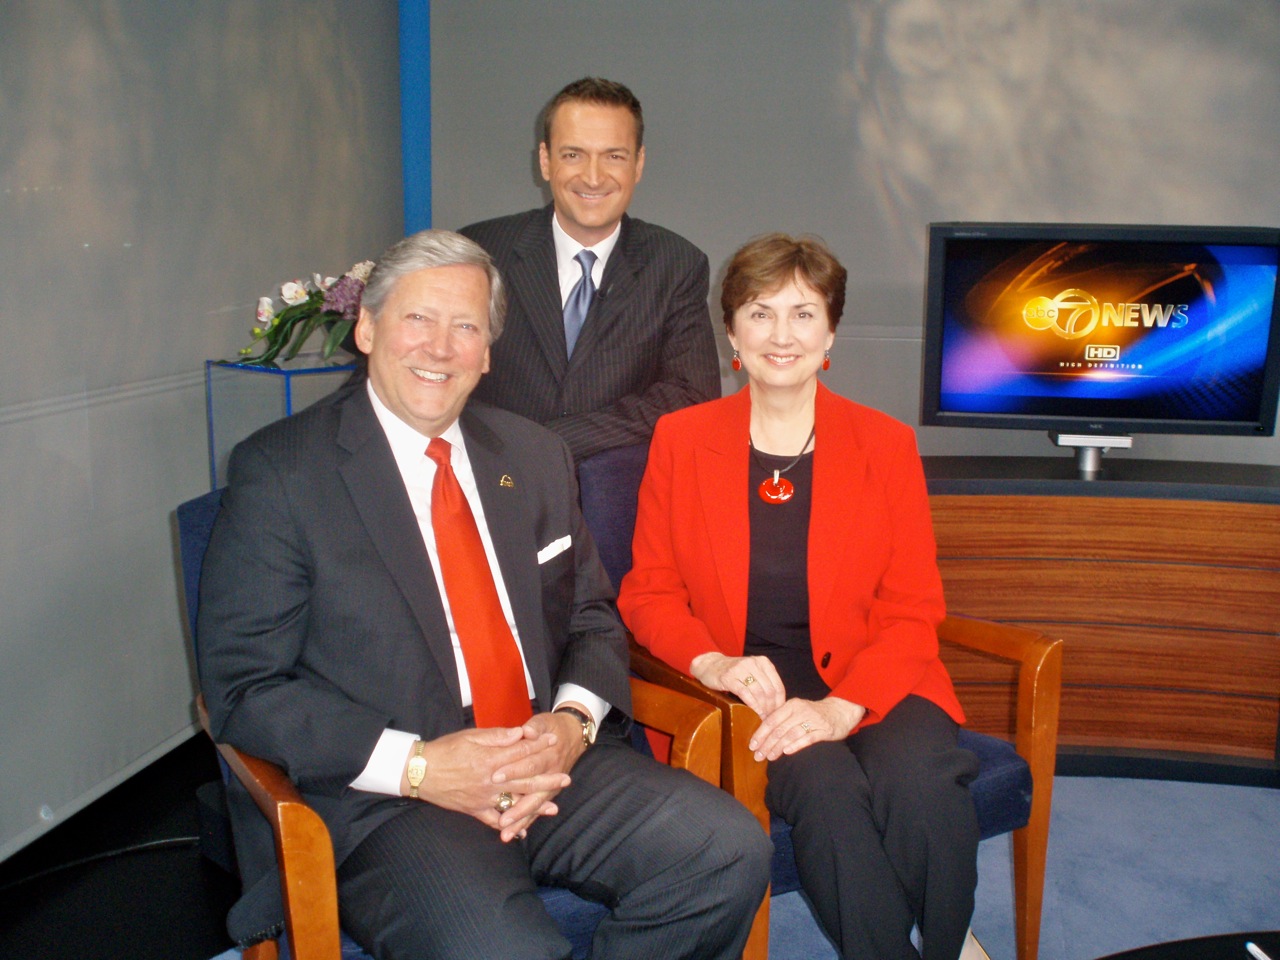 Love and Marriage Experts, Dr. Charles D. Schmitz and Dr. Elizabeth A. Schmitz inteview on WGN Morning News